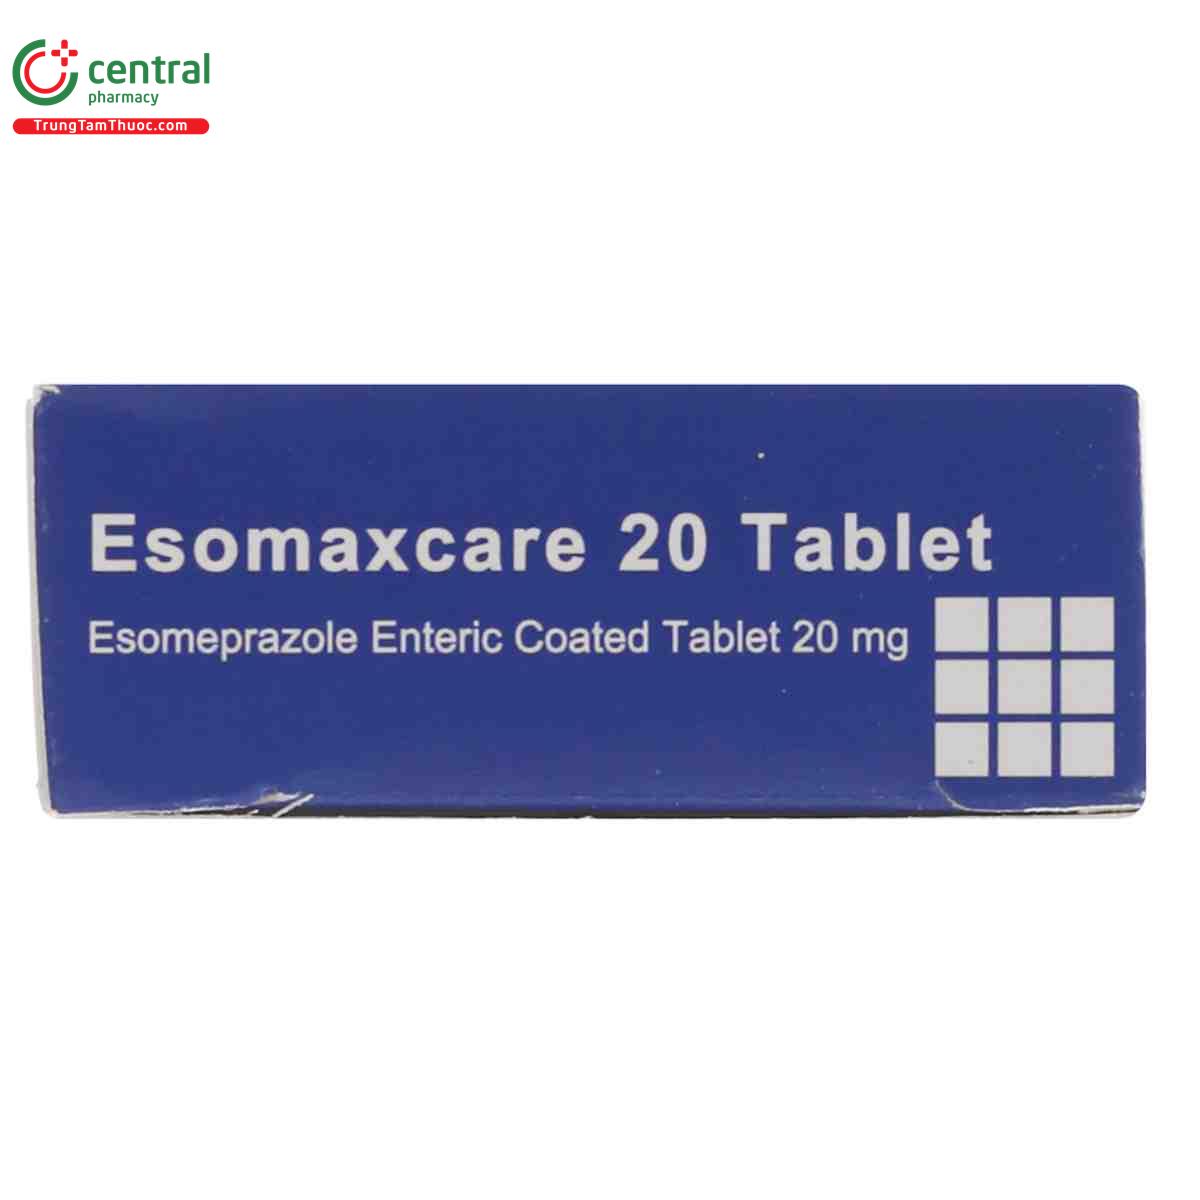 thuoc esomaxcare 20 tablet 8 B0761